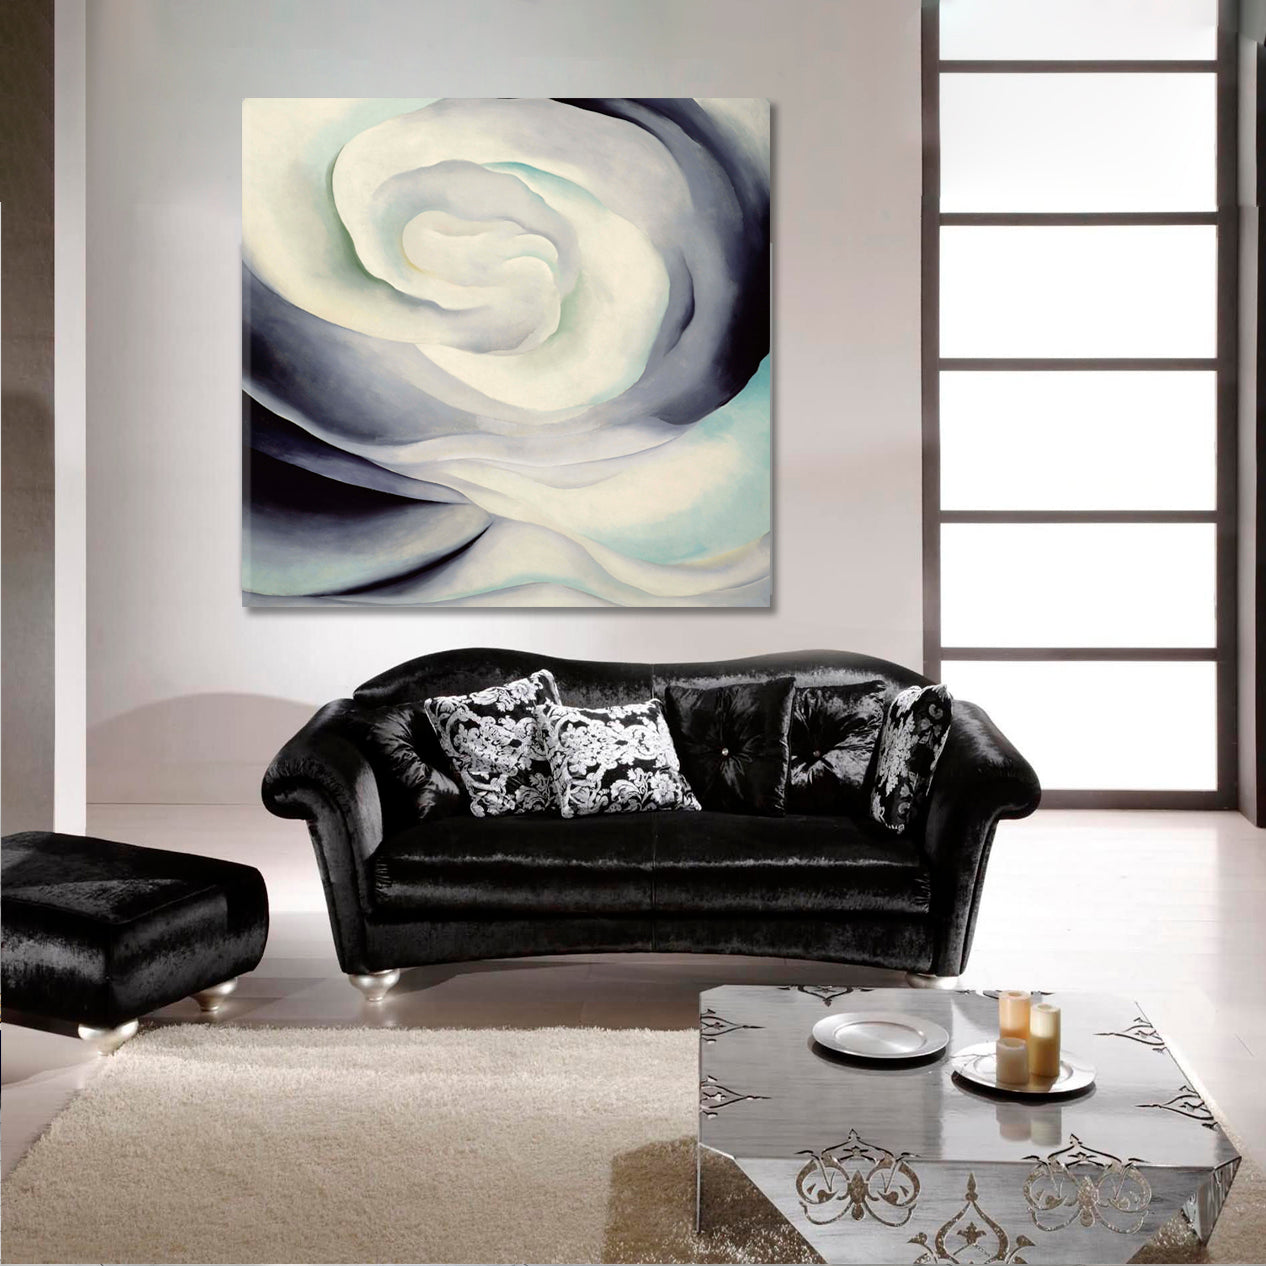 Abstraction White Rose Abstract Flowes Swirls  - Square Abstract Art Print Artesty   